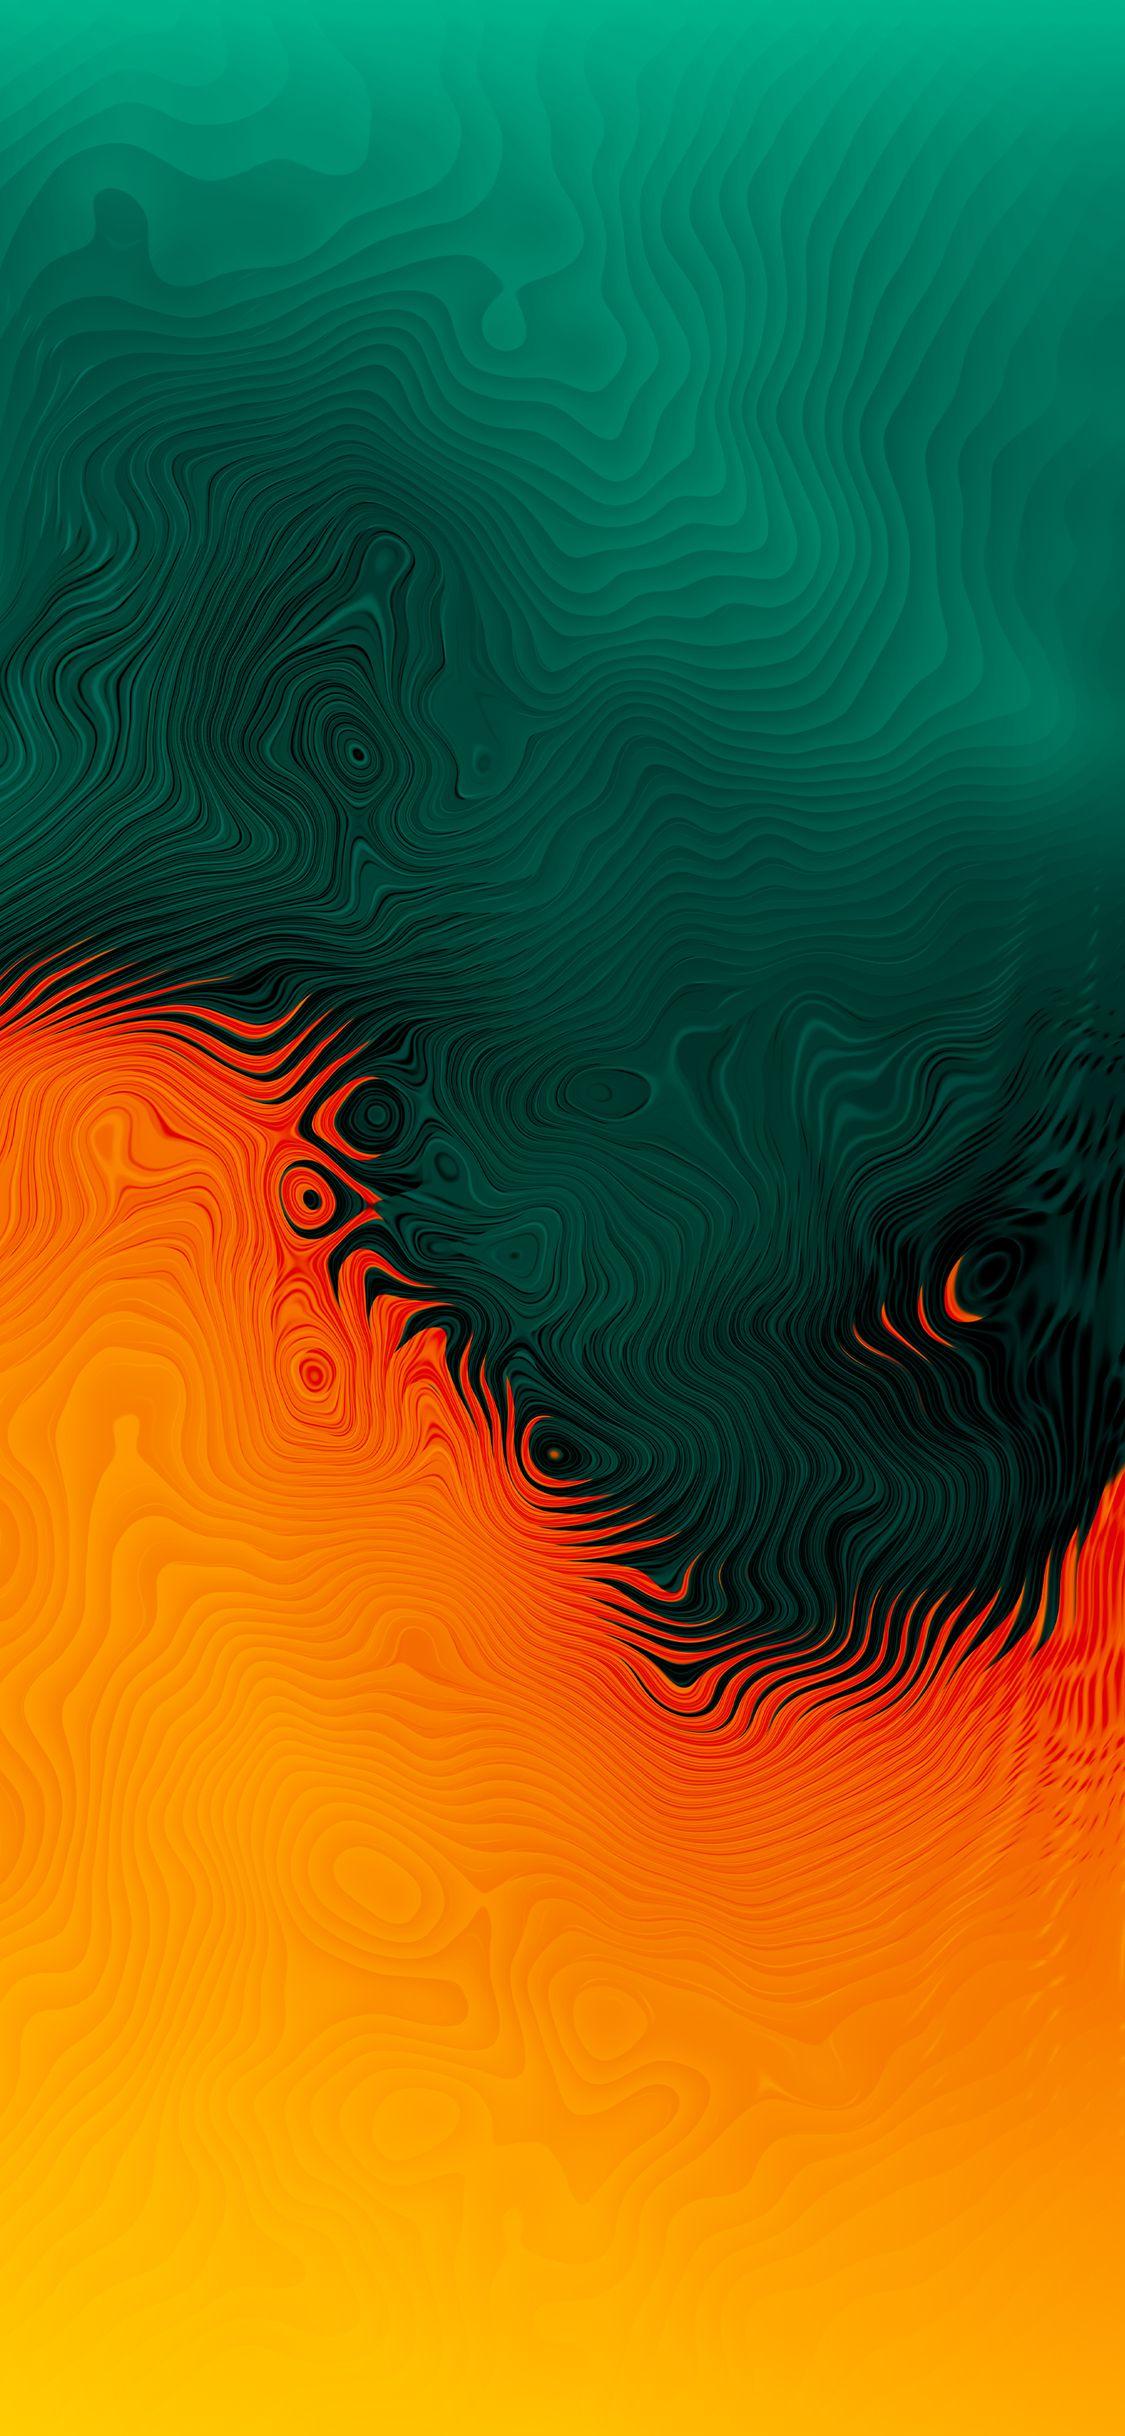 Update 58+ orange and green wallpaper latest - in.cdgdbentre